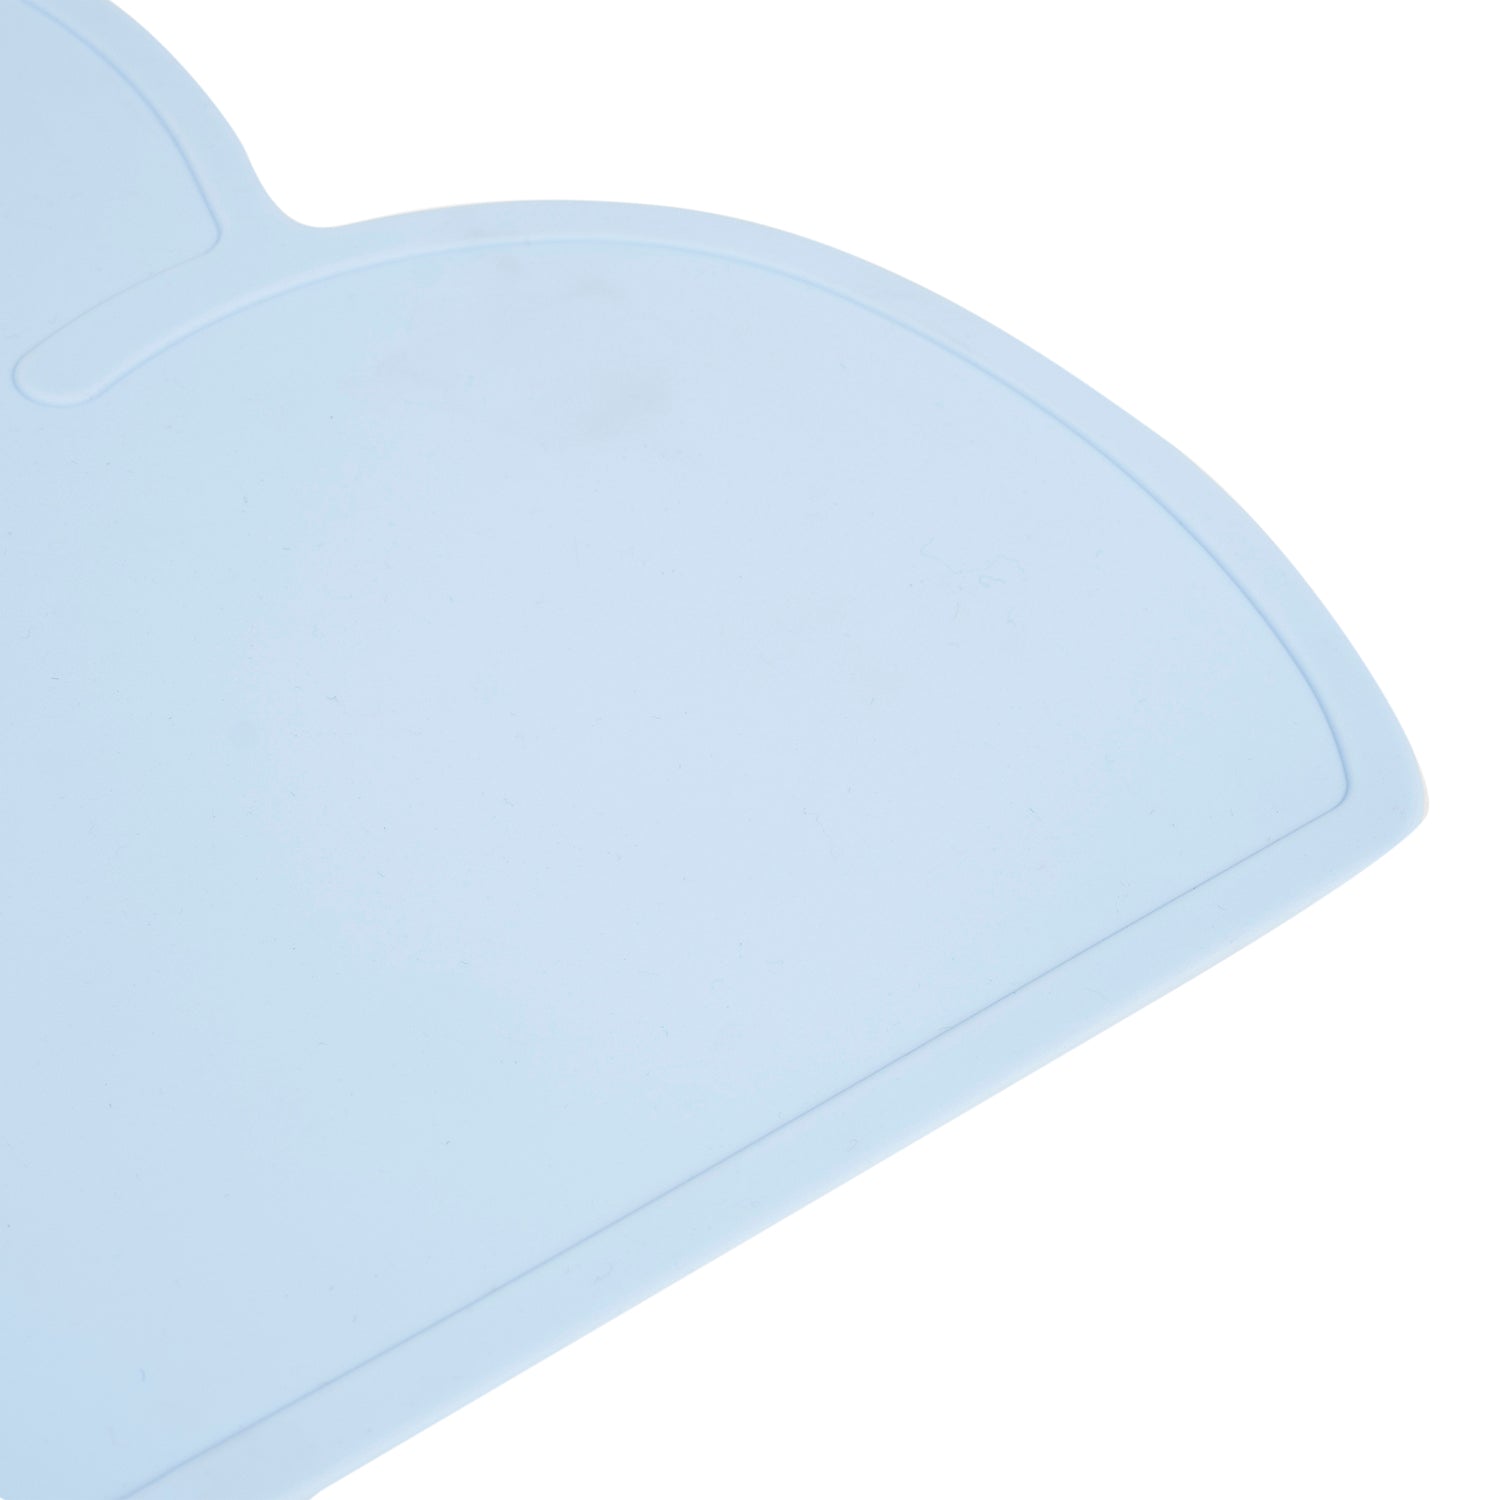 Baby Moo Cloud Shaped Kids Dining Table Silicone Waterproof Placemat - Blue